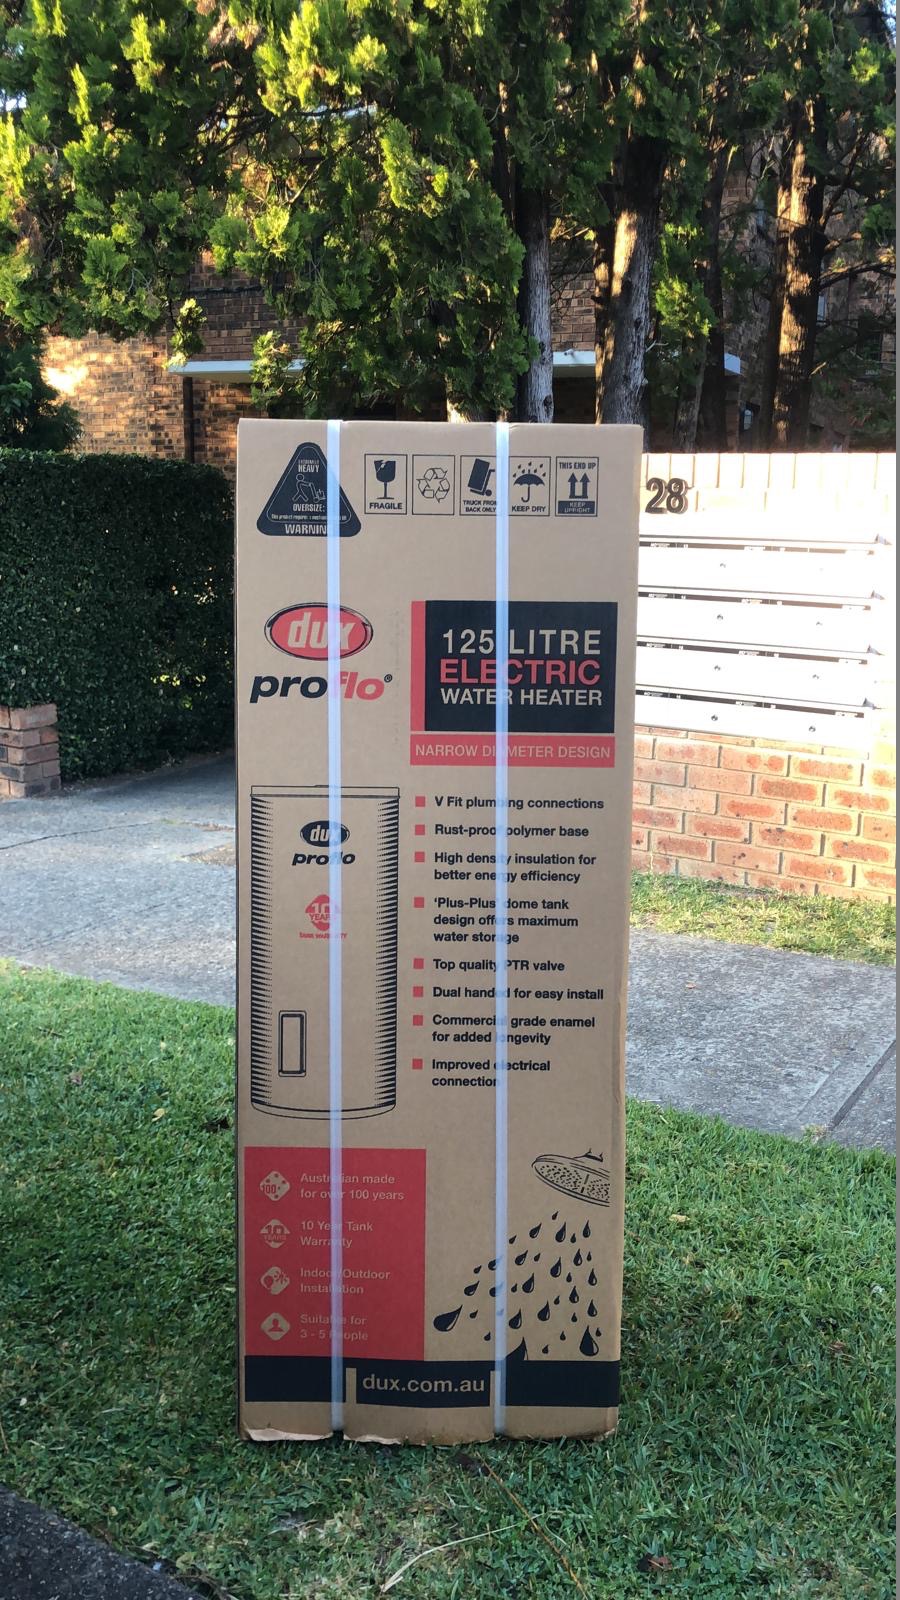 27.4.21-Dux-Proflo-125X136-electric-narrow-diameter-125ltr-hot-water-system-brand-new-in-box-for-happy-customer-in-Hornsby-2077-1.jpg